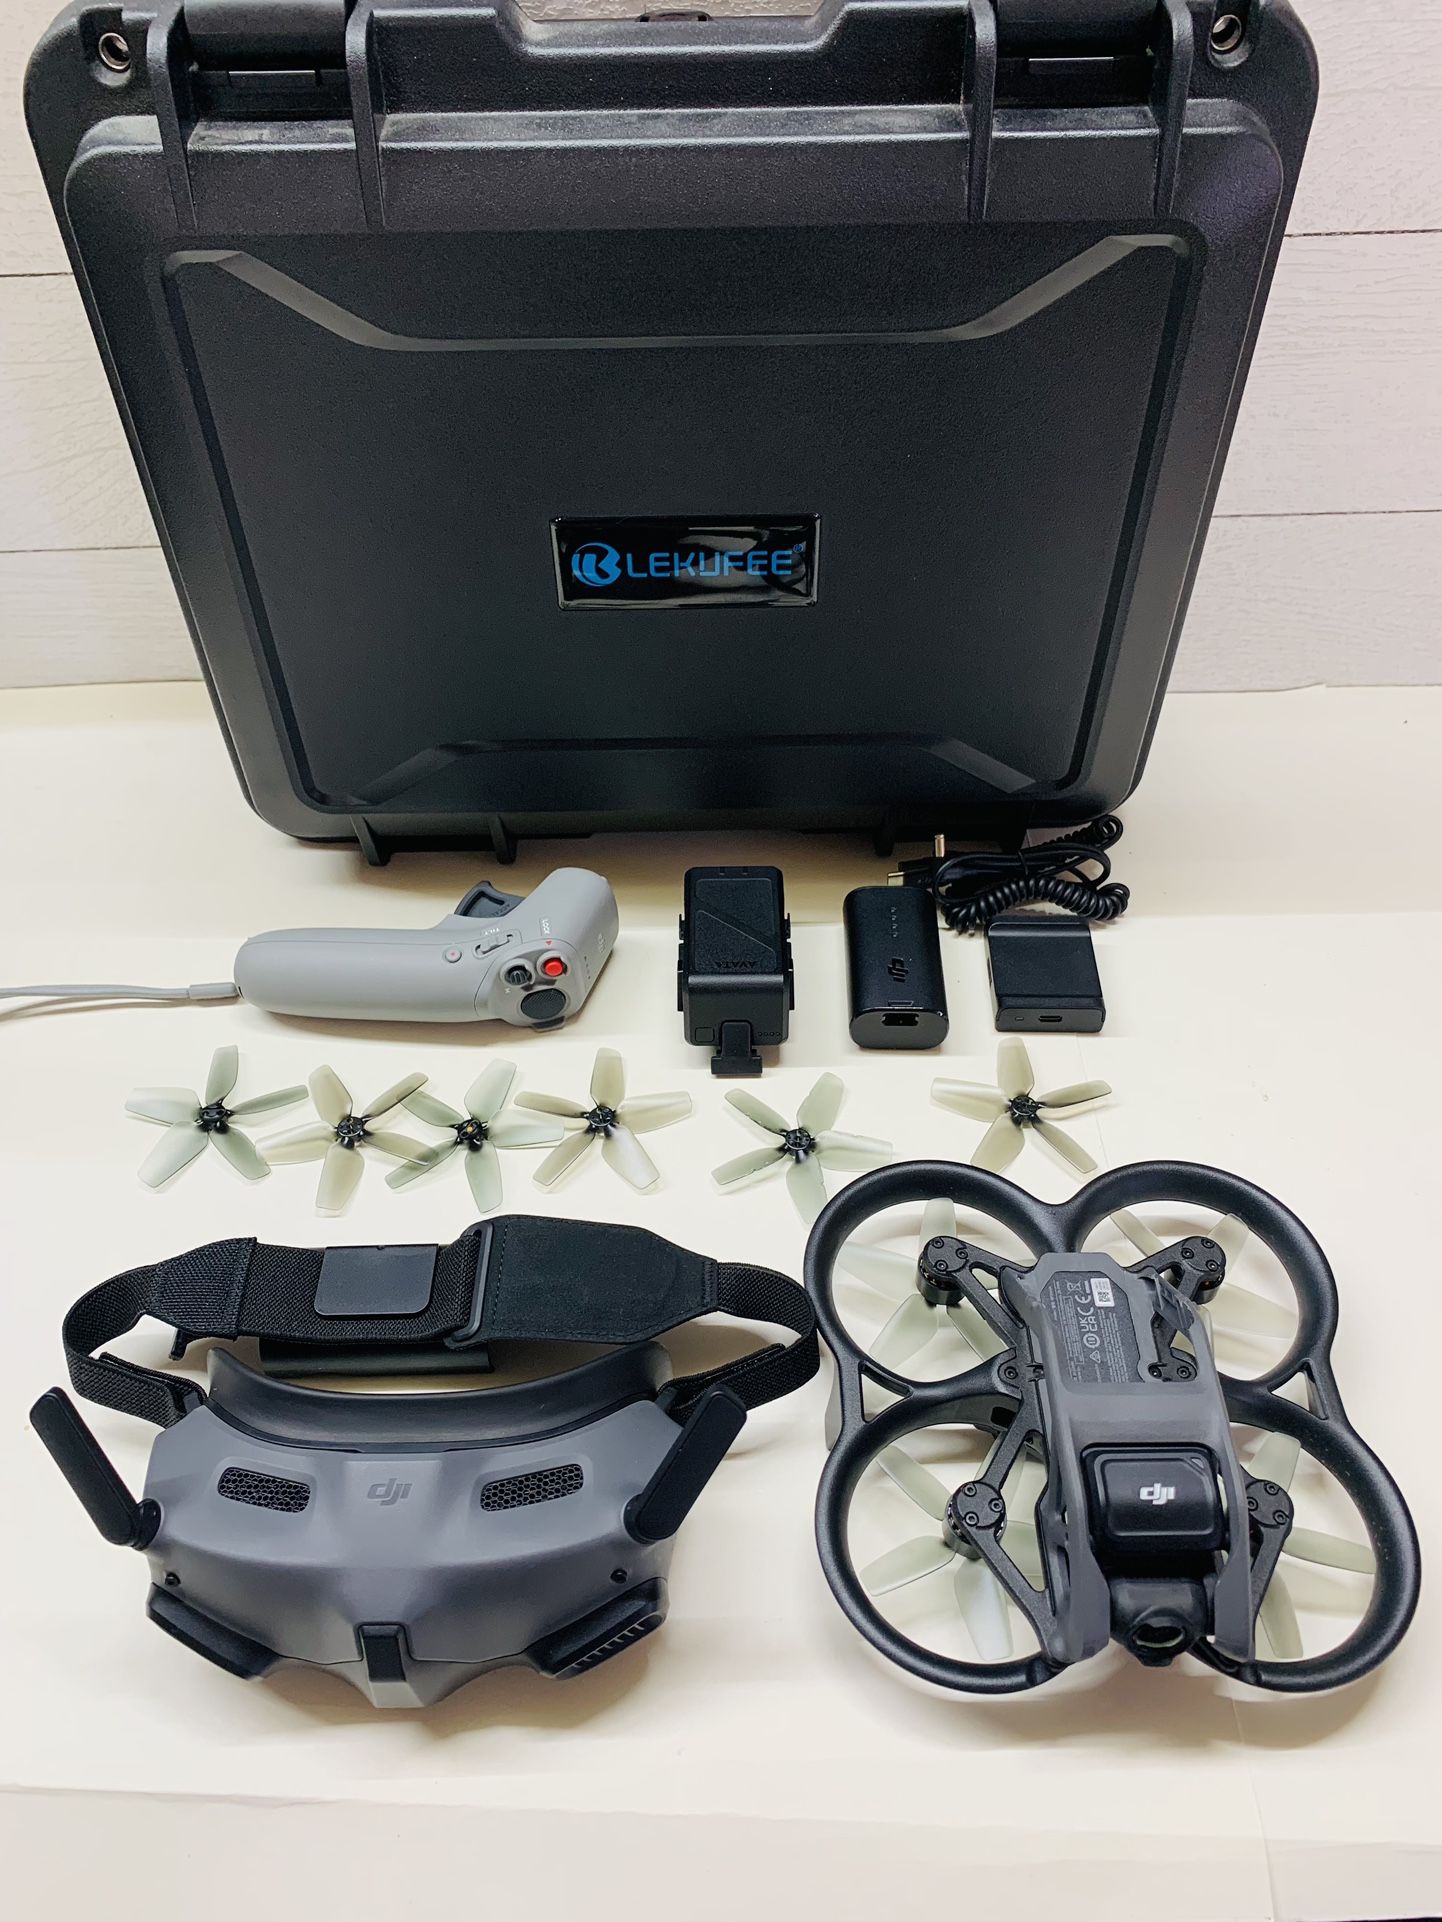 DJI - Avata Pro-View Combo Drone with Motion Controller 2 , Goggles 2 and Hard Case